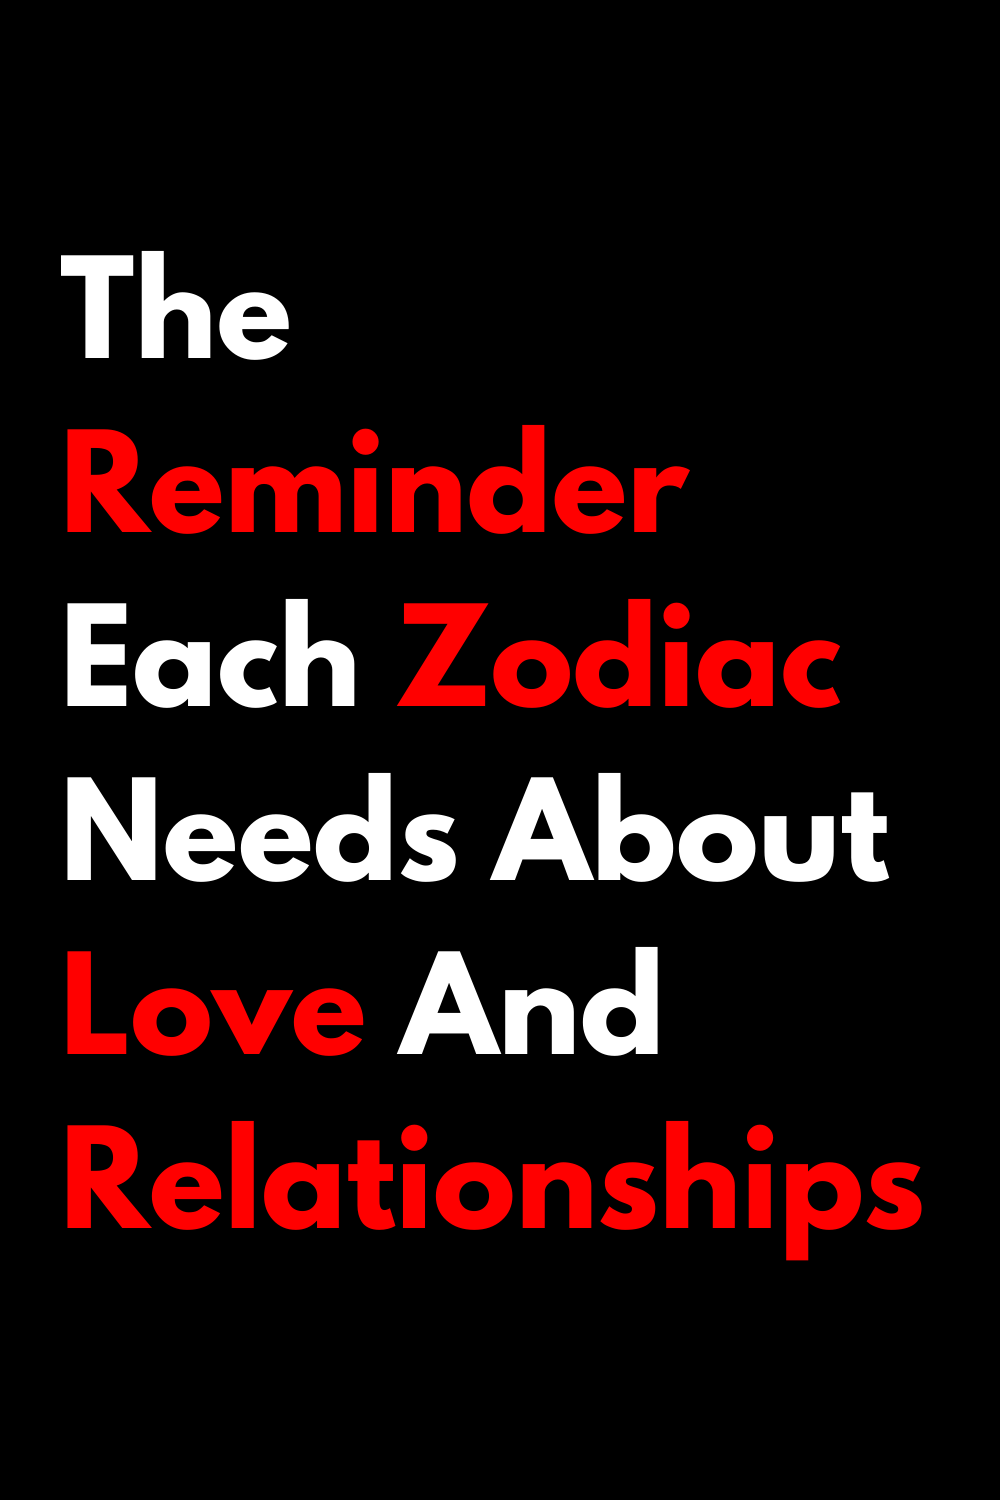 The Reminder Each Zodiac Needs About Love And Relationships